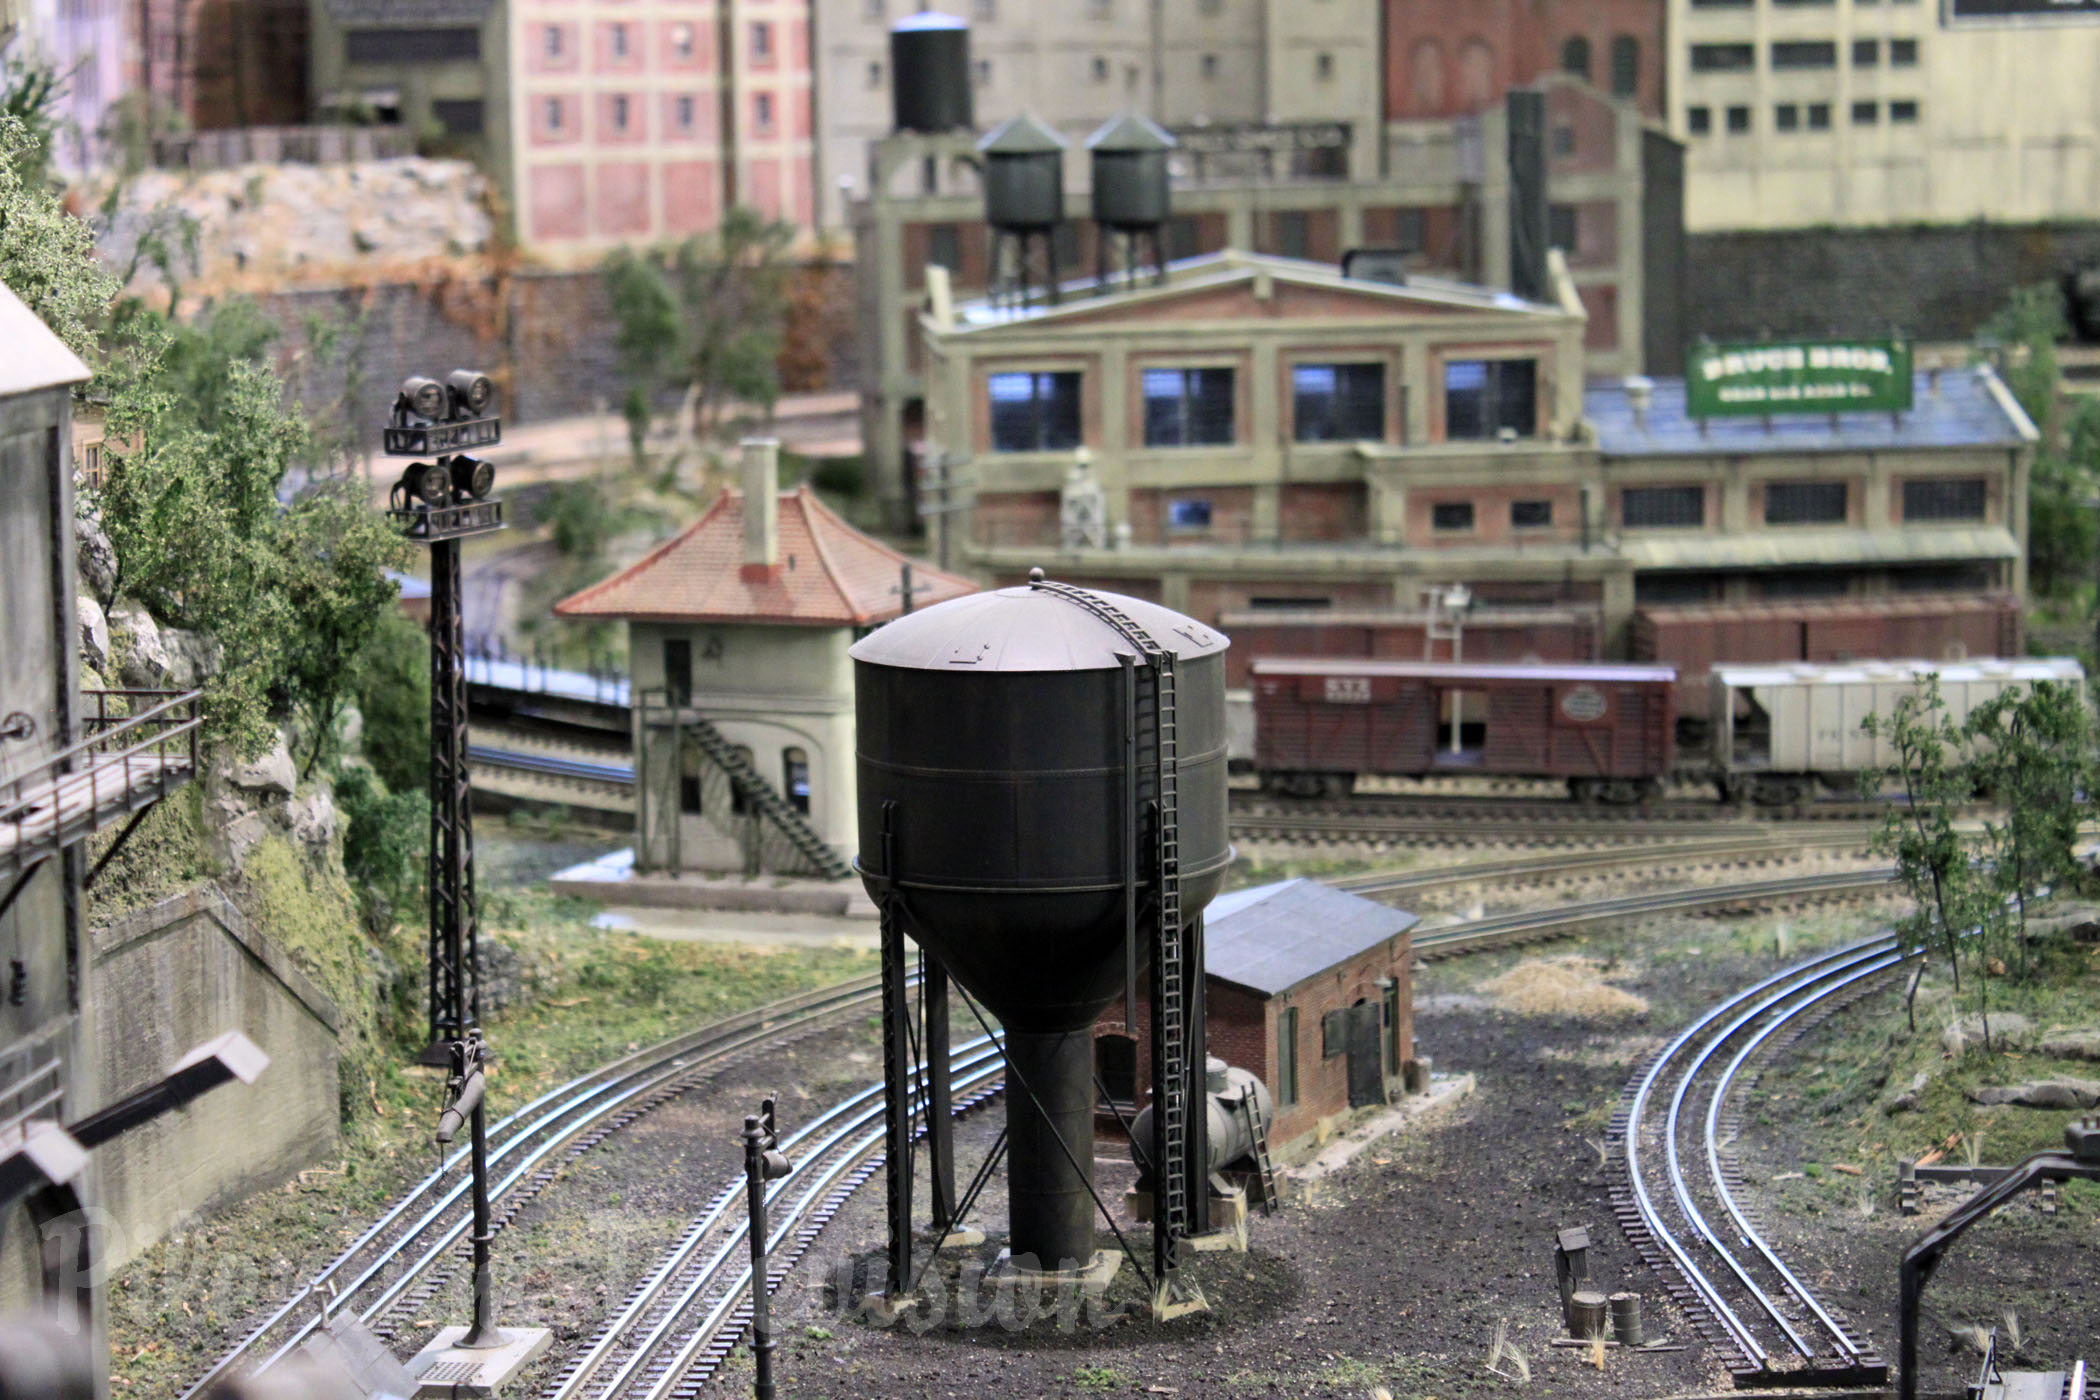 Big Steamers Paradise in O Scale - The Iconic Model Railroad Layout Greenbrook by Norm Charbonneau